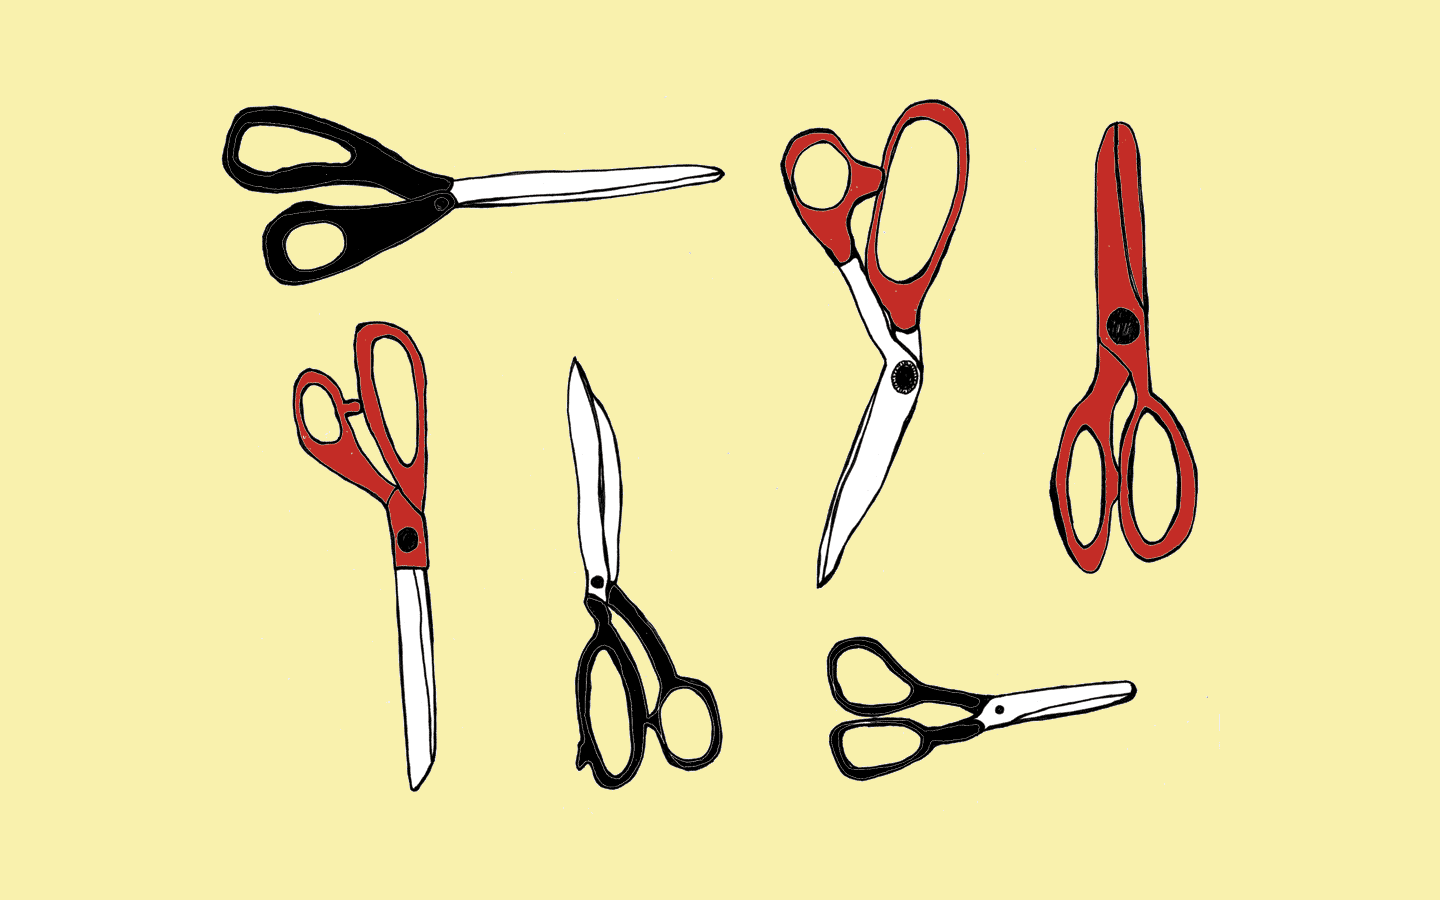 Scissors CC-BY licensed picture by Spin Spin on Flickr at http://flic.kr/p/5oioVL